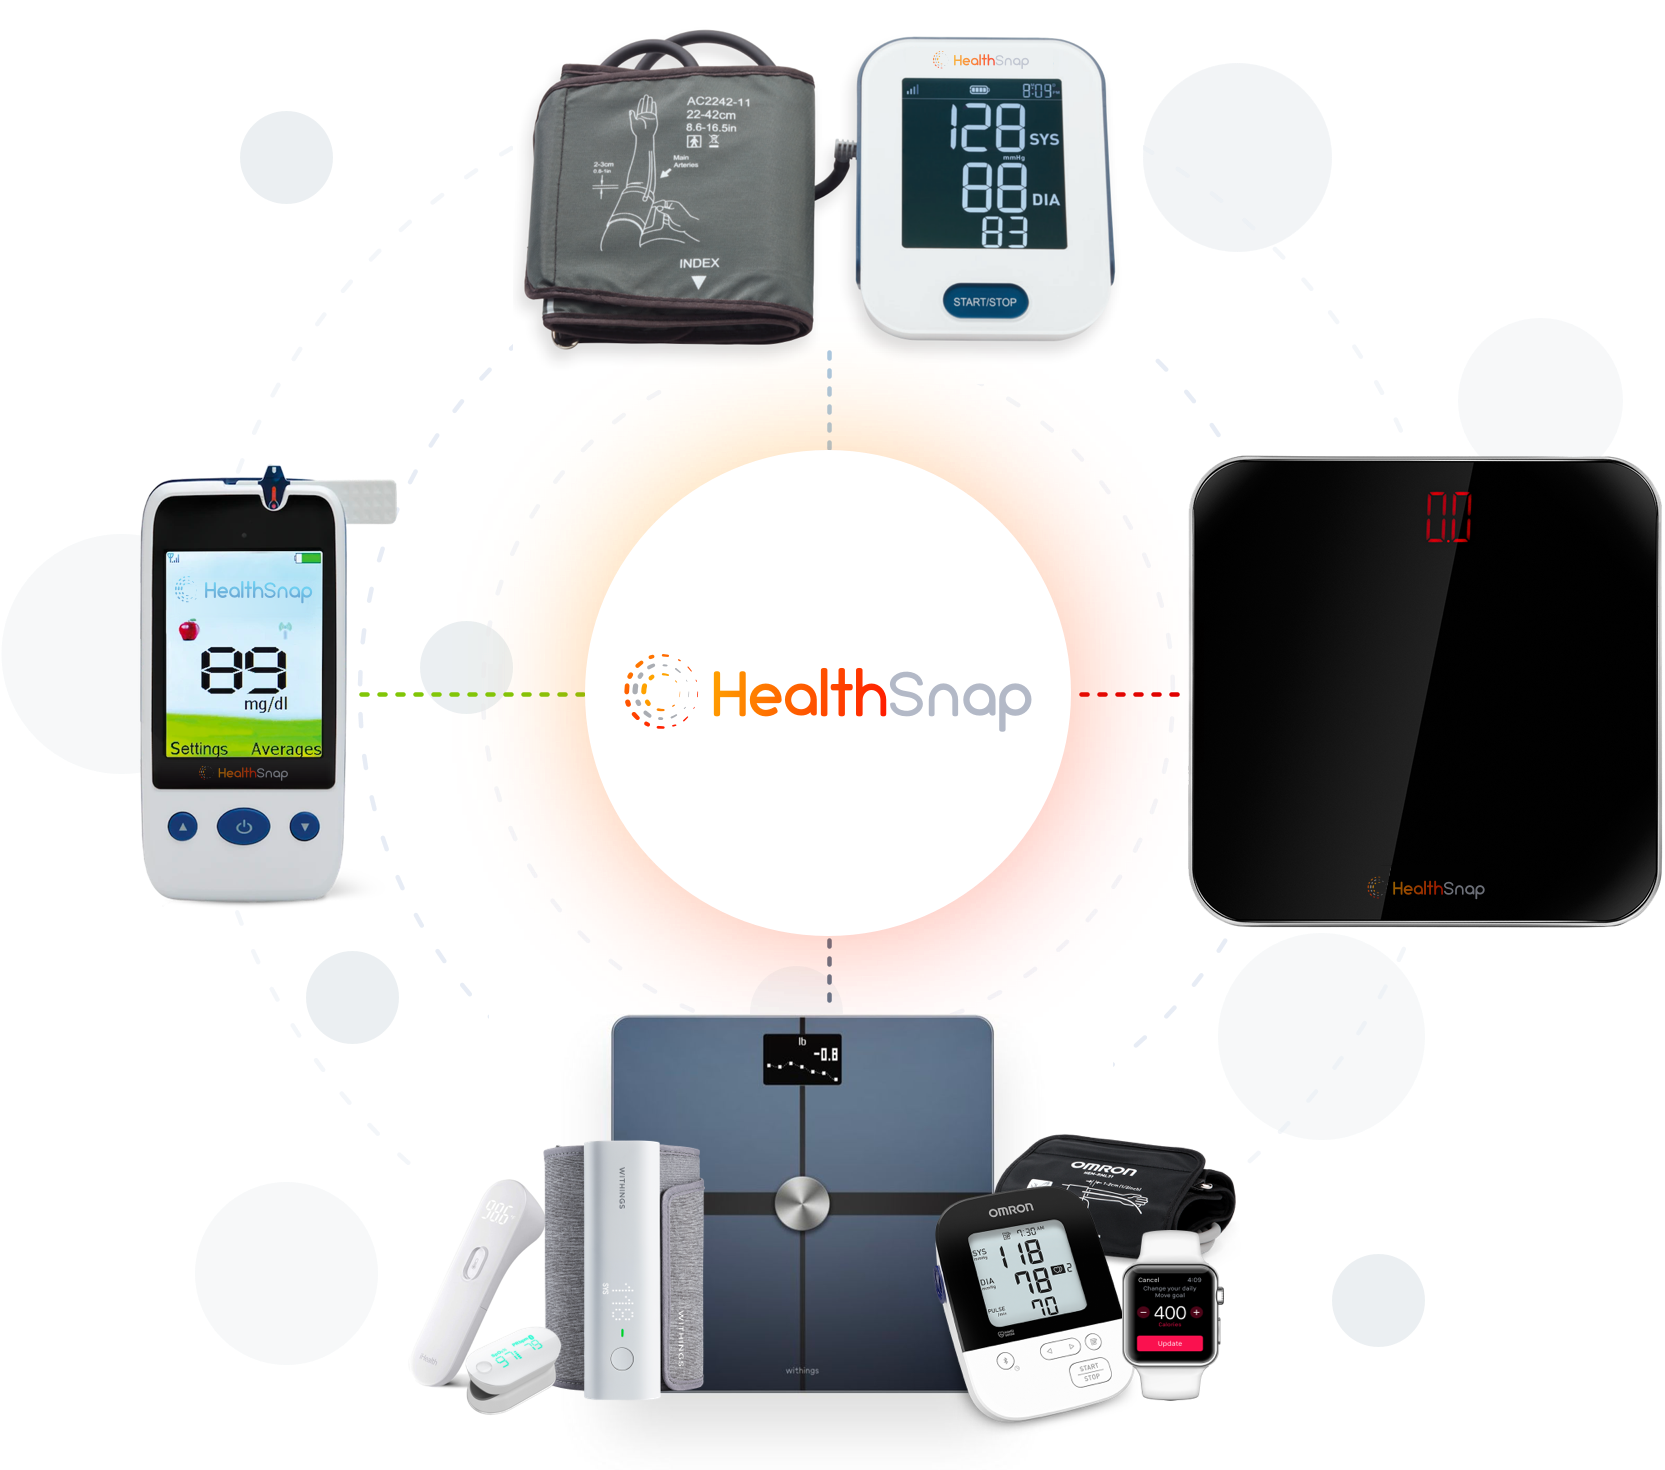 Remote Patient Monitoring Devices remote monitoring health system remote patient monitoring program blood pressure chronic disease patient monitoring chronic obstructive pulmonary disease track patient recovery patient care  health system